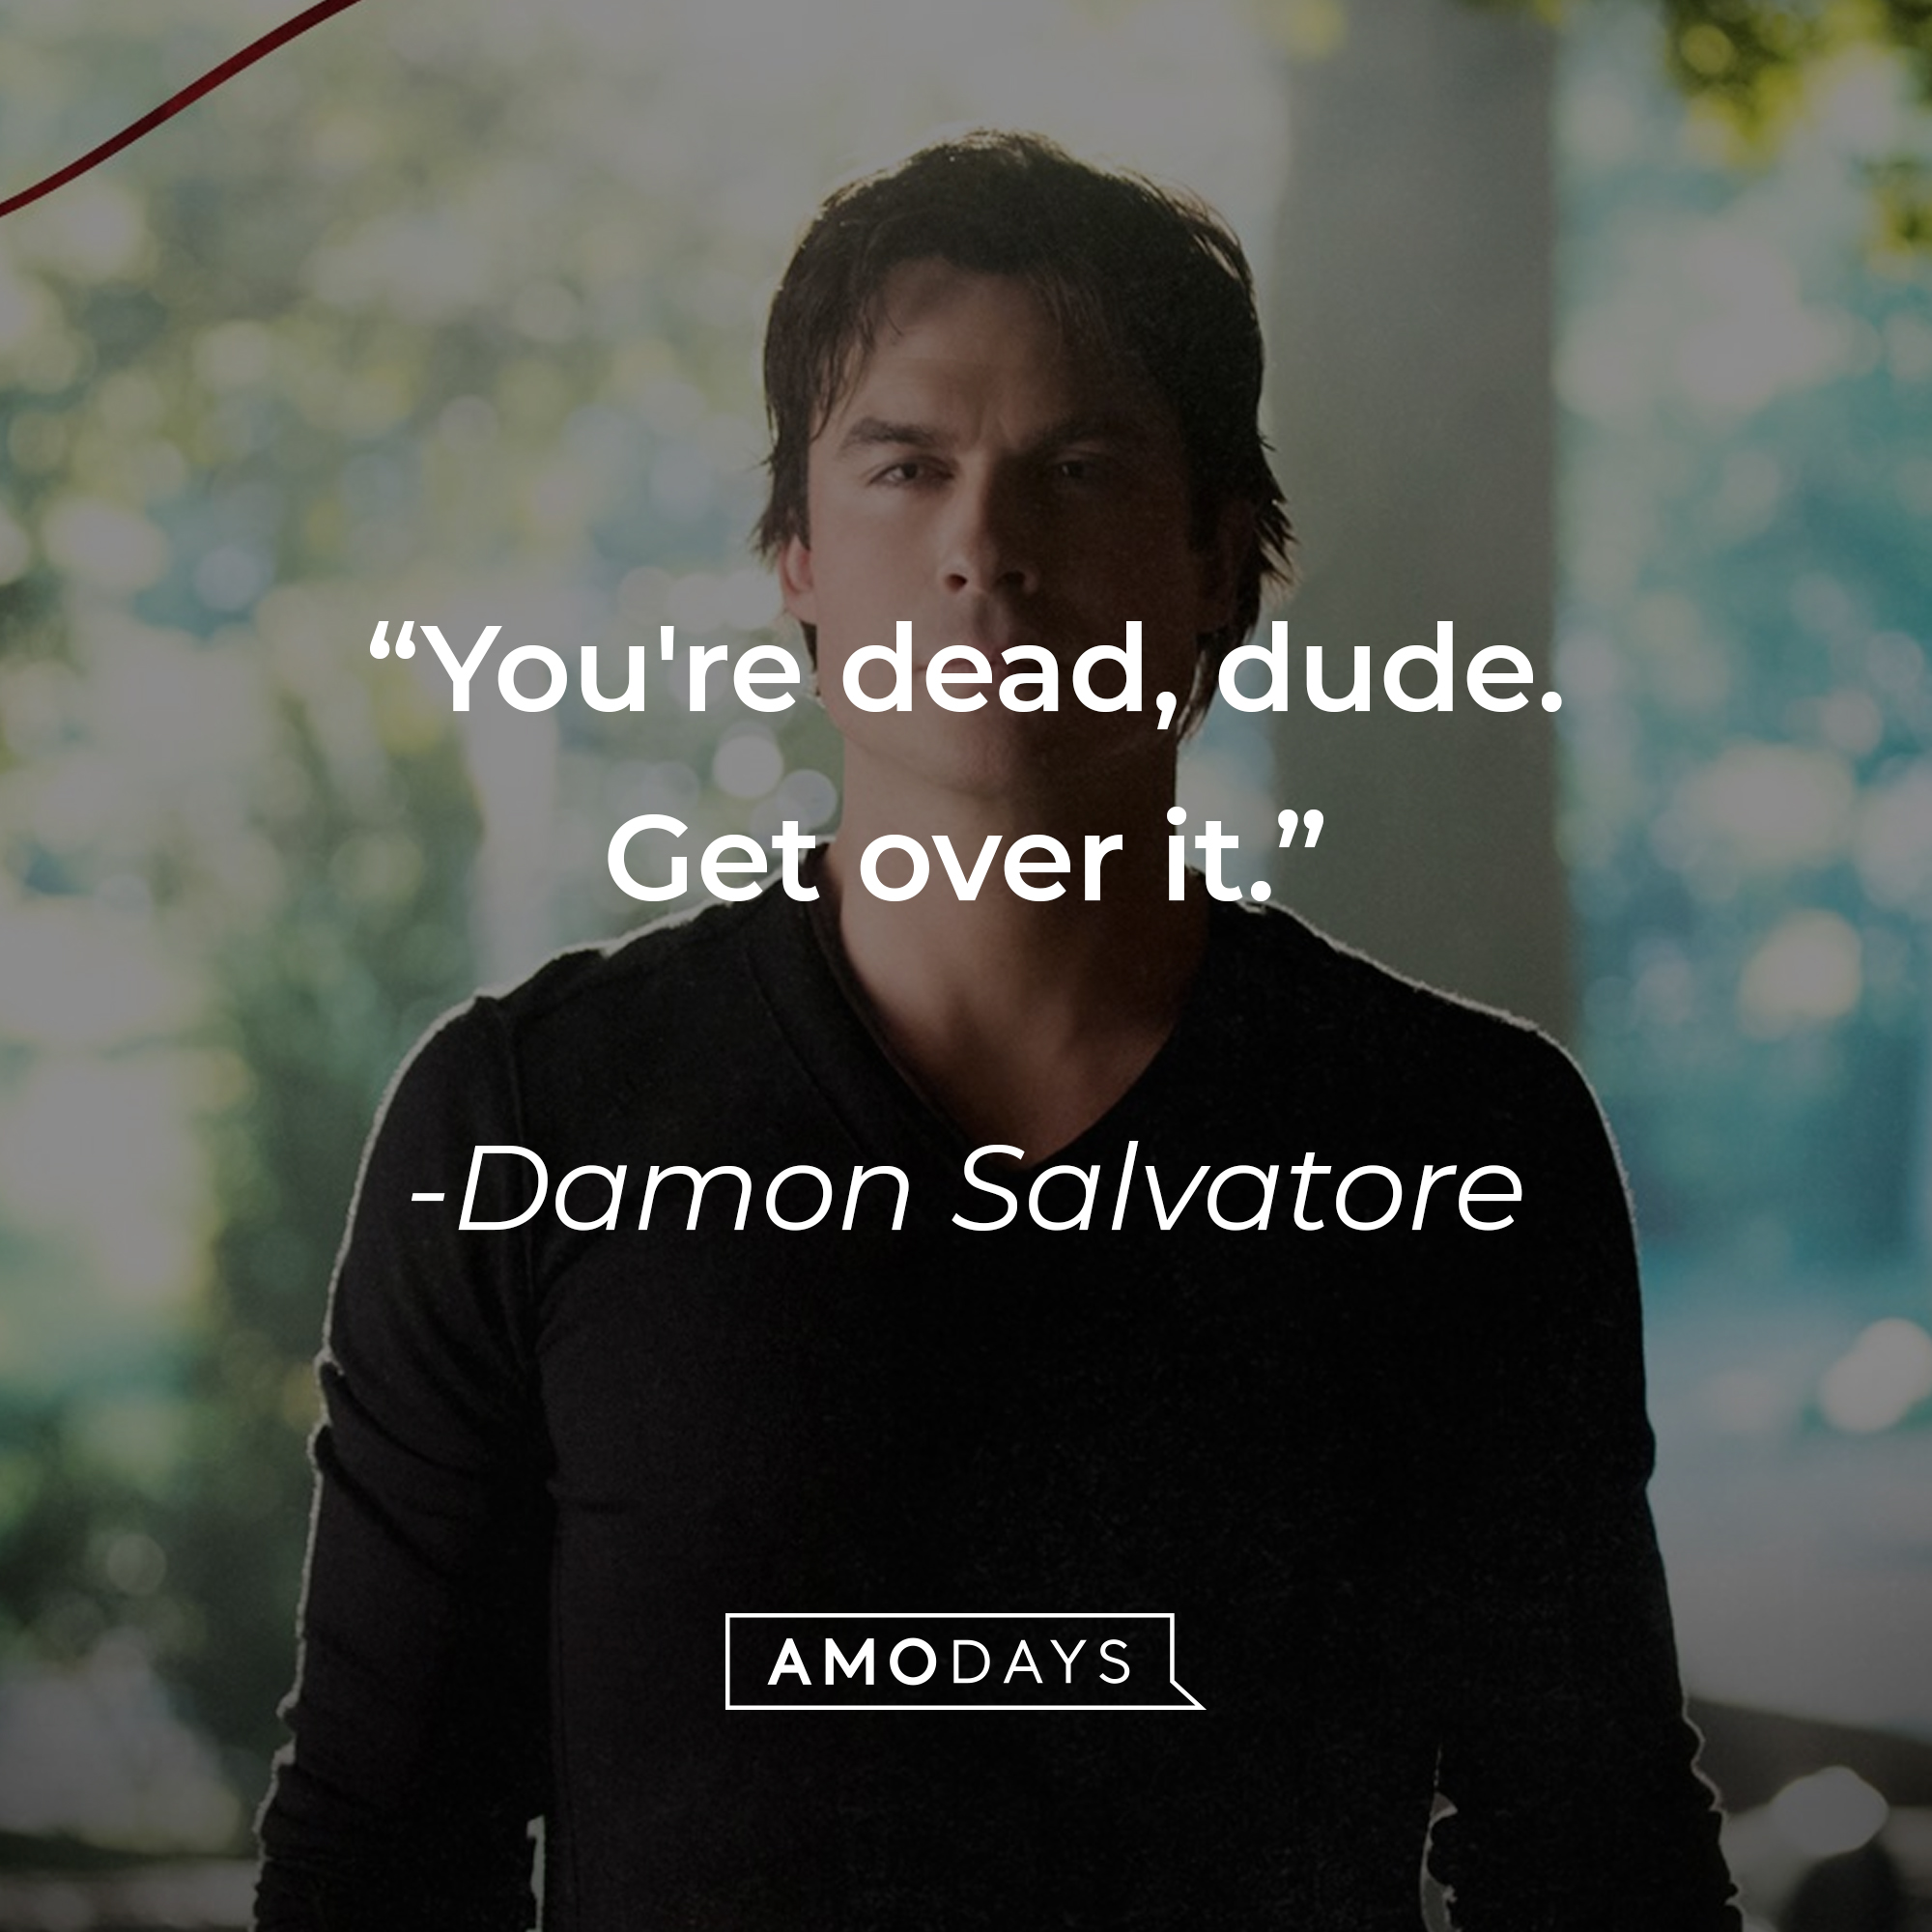 A photo of Damon Salvatore with the quote, "You're dead, dude. Get over it." | Source: Facebook/thevampirediaries